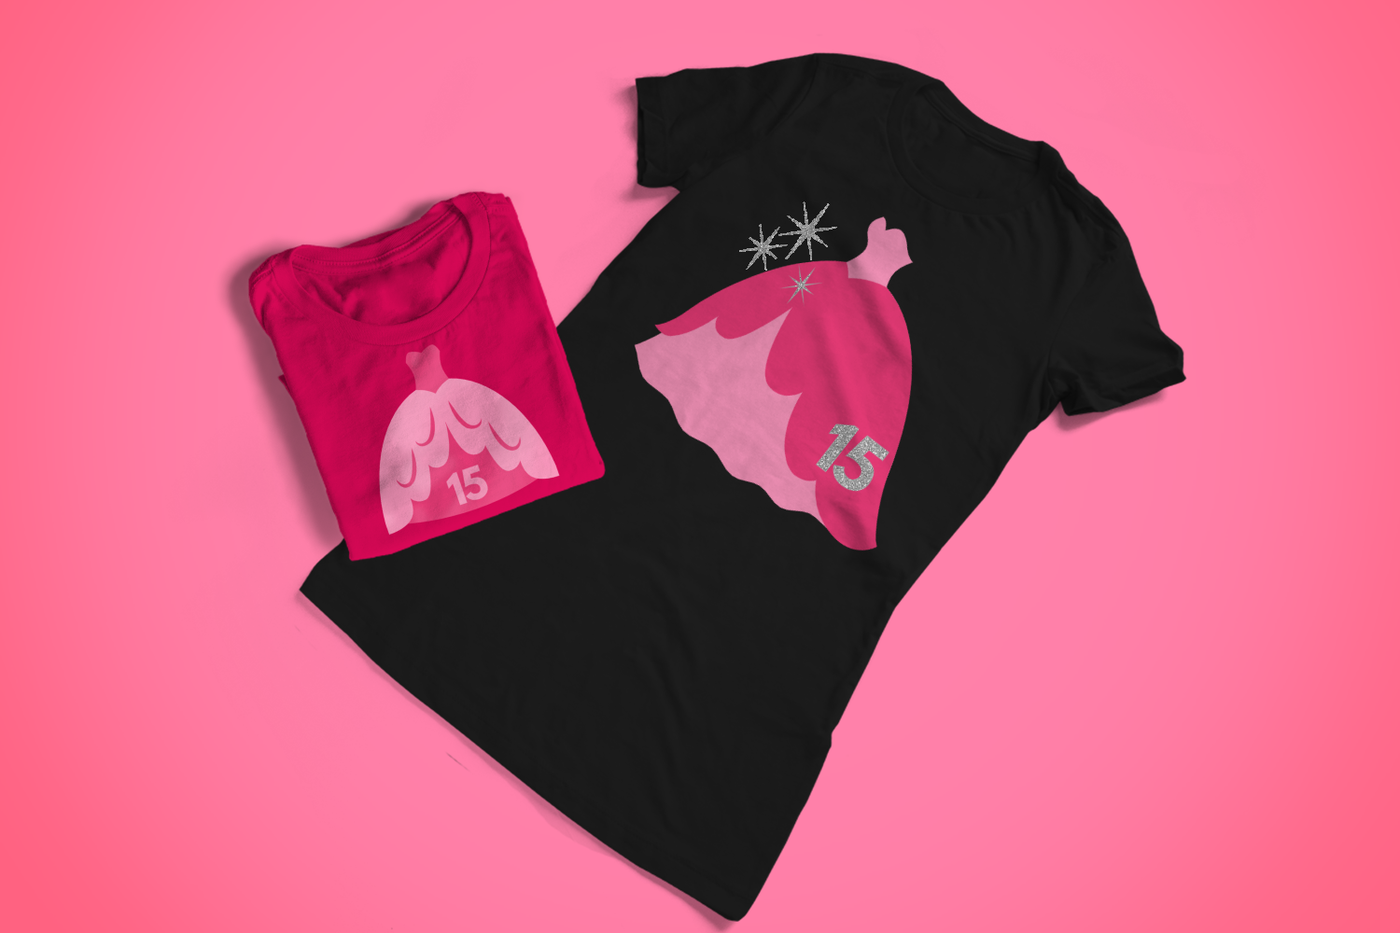 Two tees on a pink background. Each has an image of a fancy ballgown with the number 15. One is from a front view, and the other has the gown shown slightly from the side.